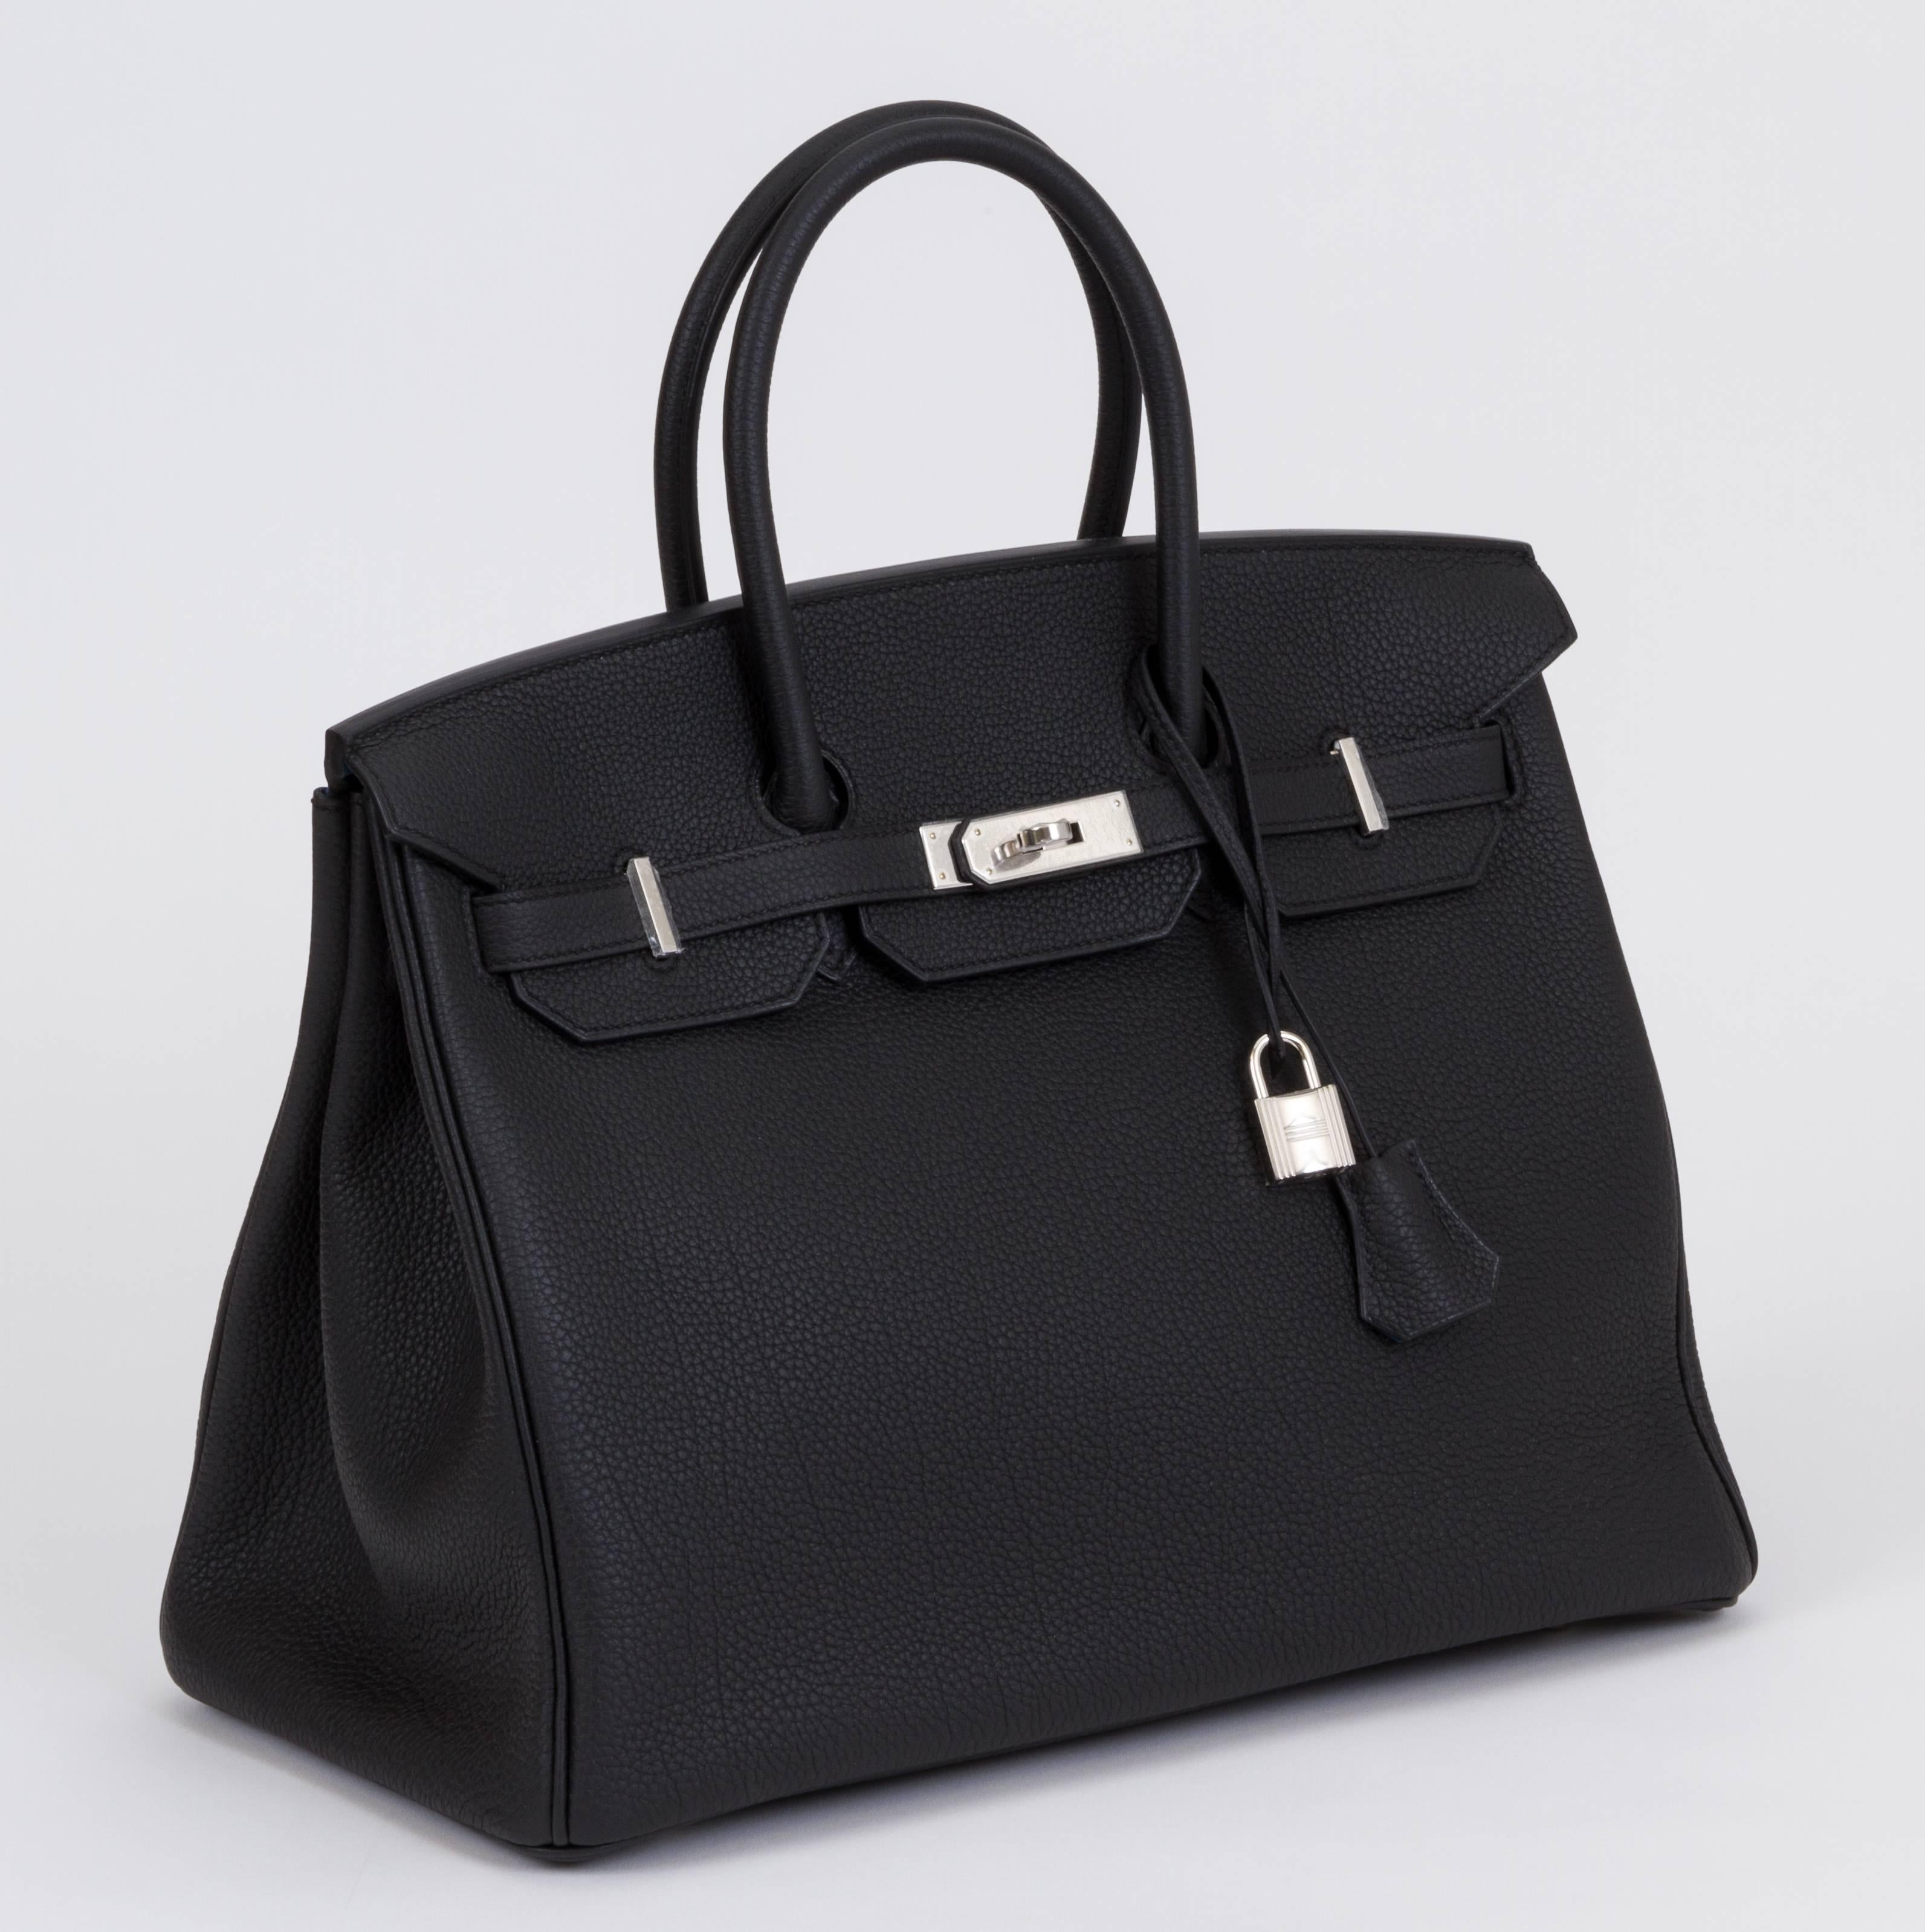 Hermes limited edition rare and collectible birkin 35 